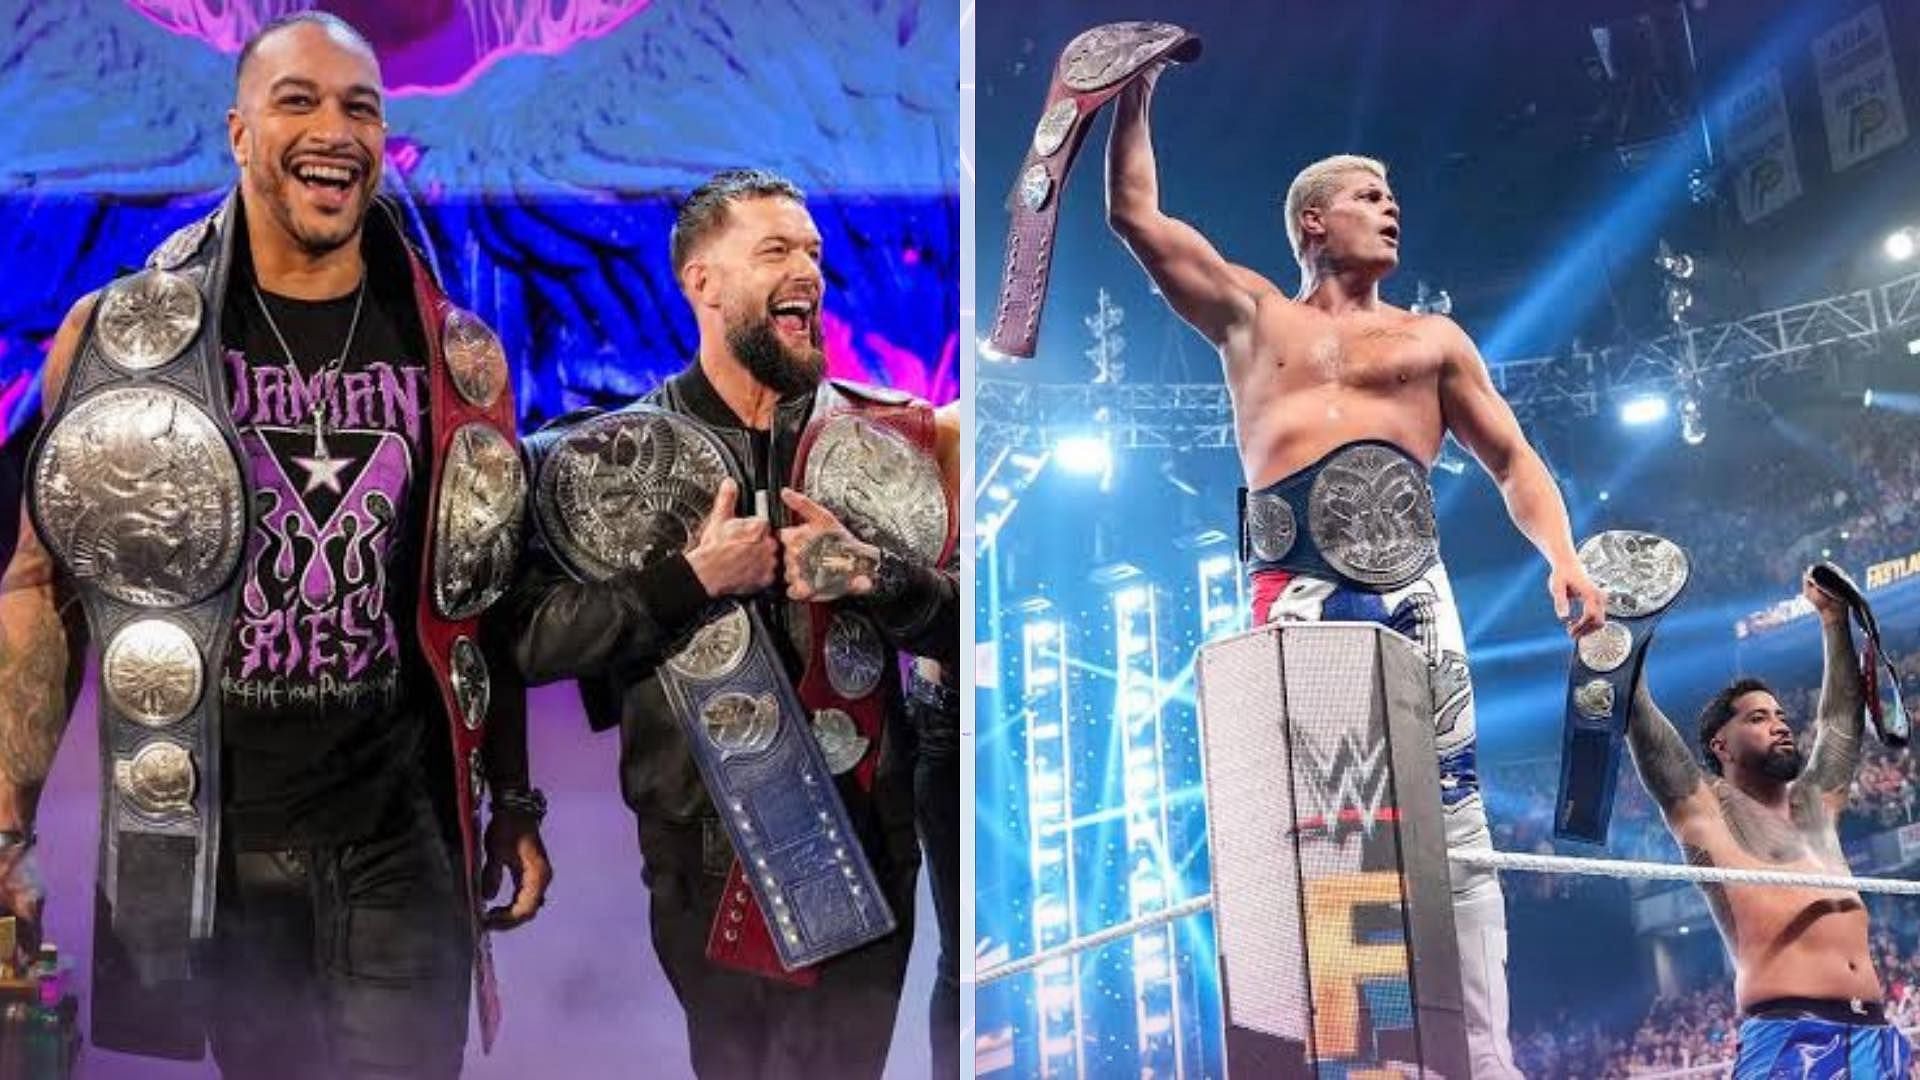 Will the Judgment Day keep the Undisputed Tag Team titles on next week